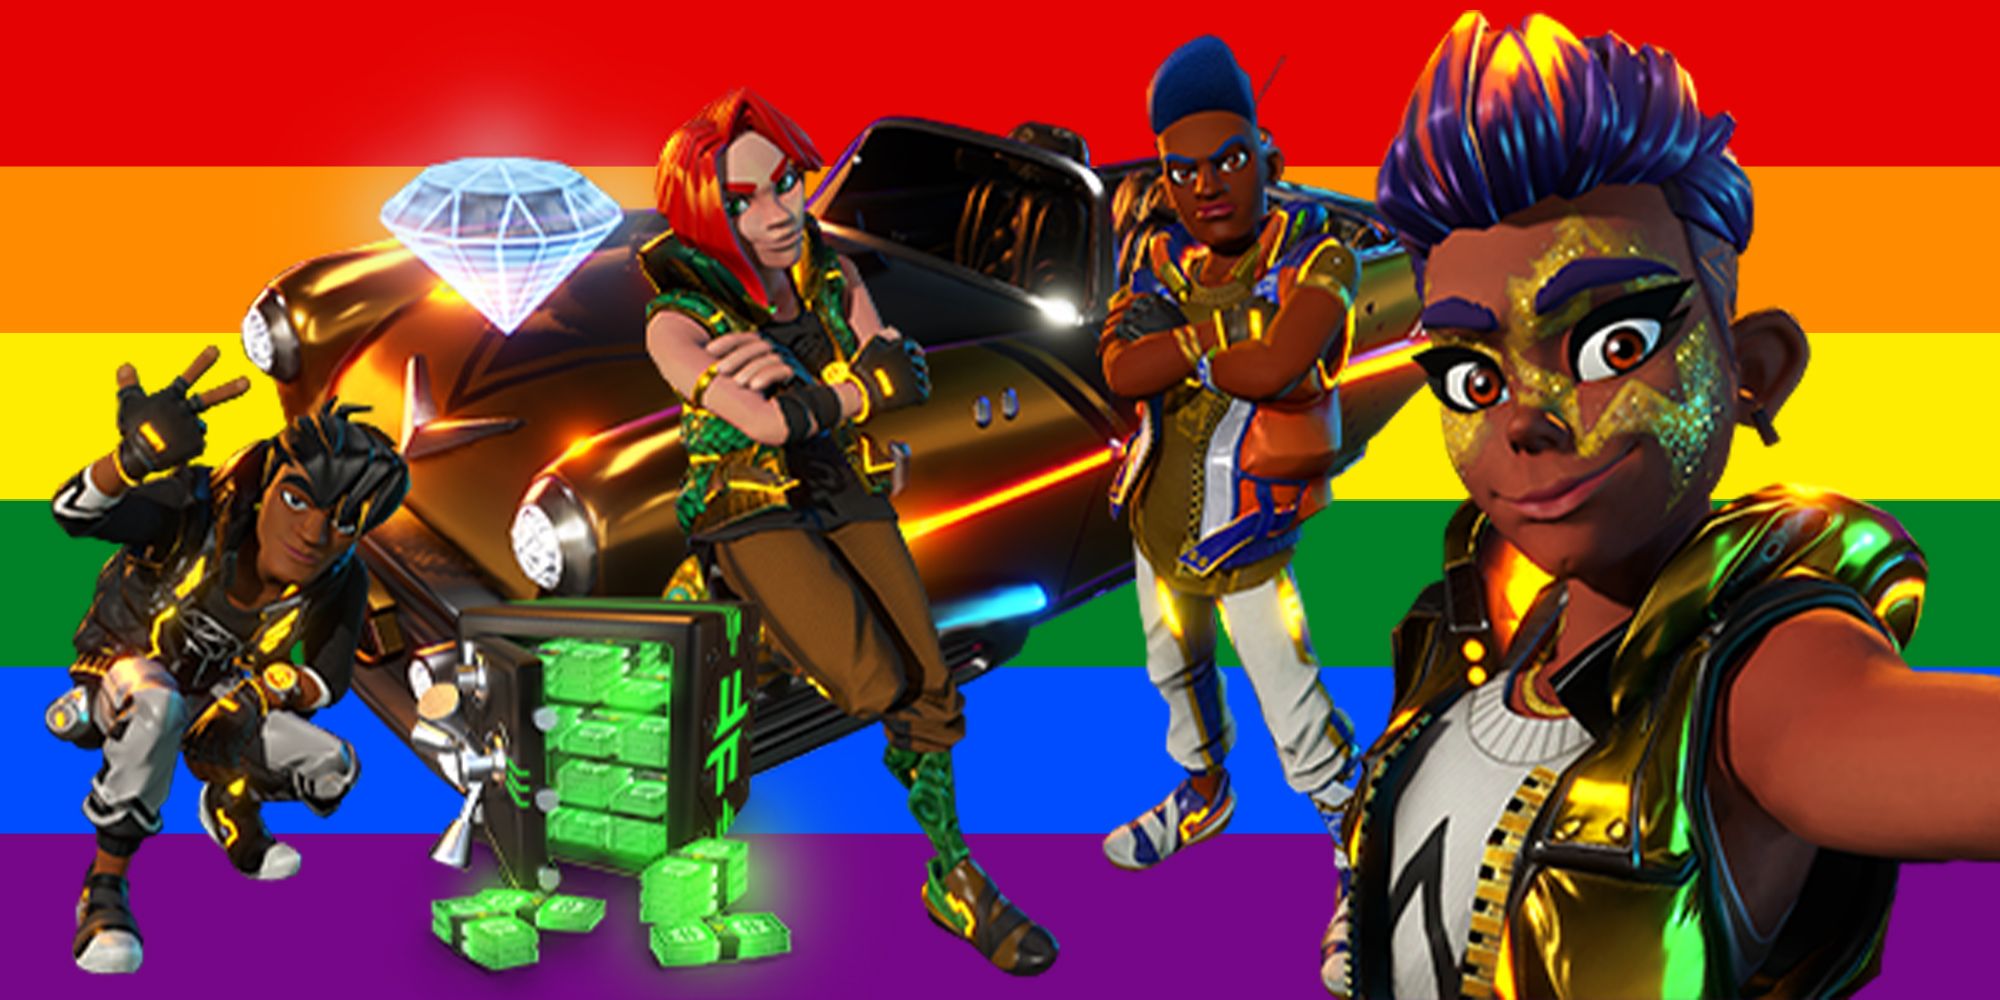 Knockout City on X: In honor of Pride Month, our LGBT+ developers